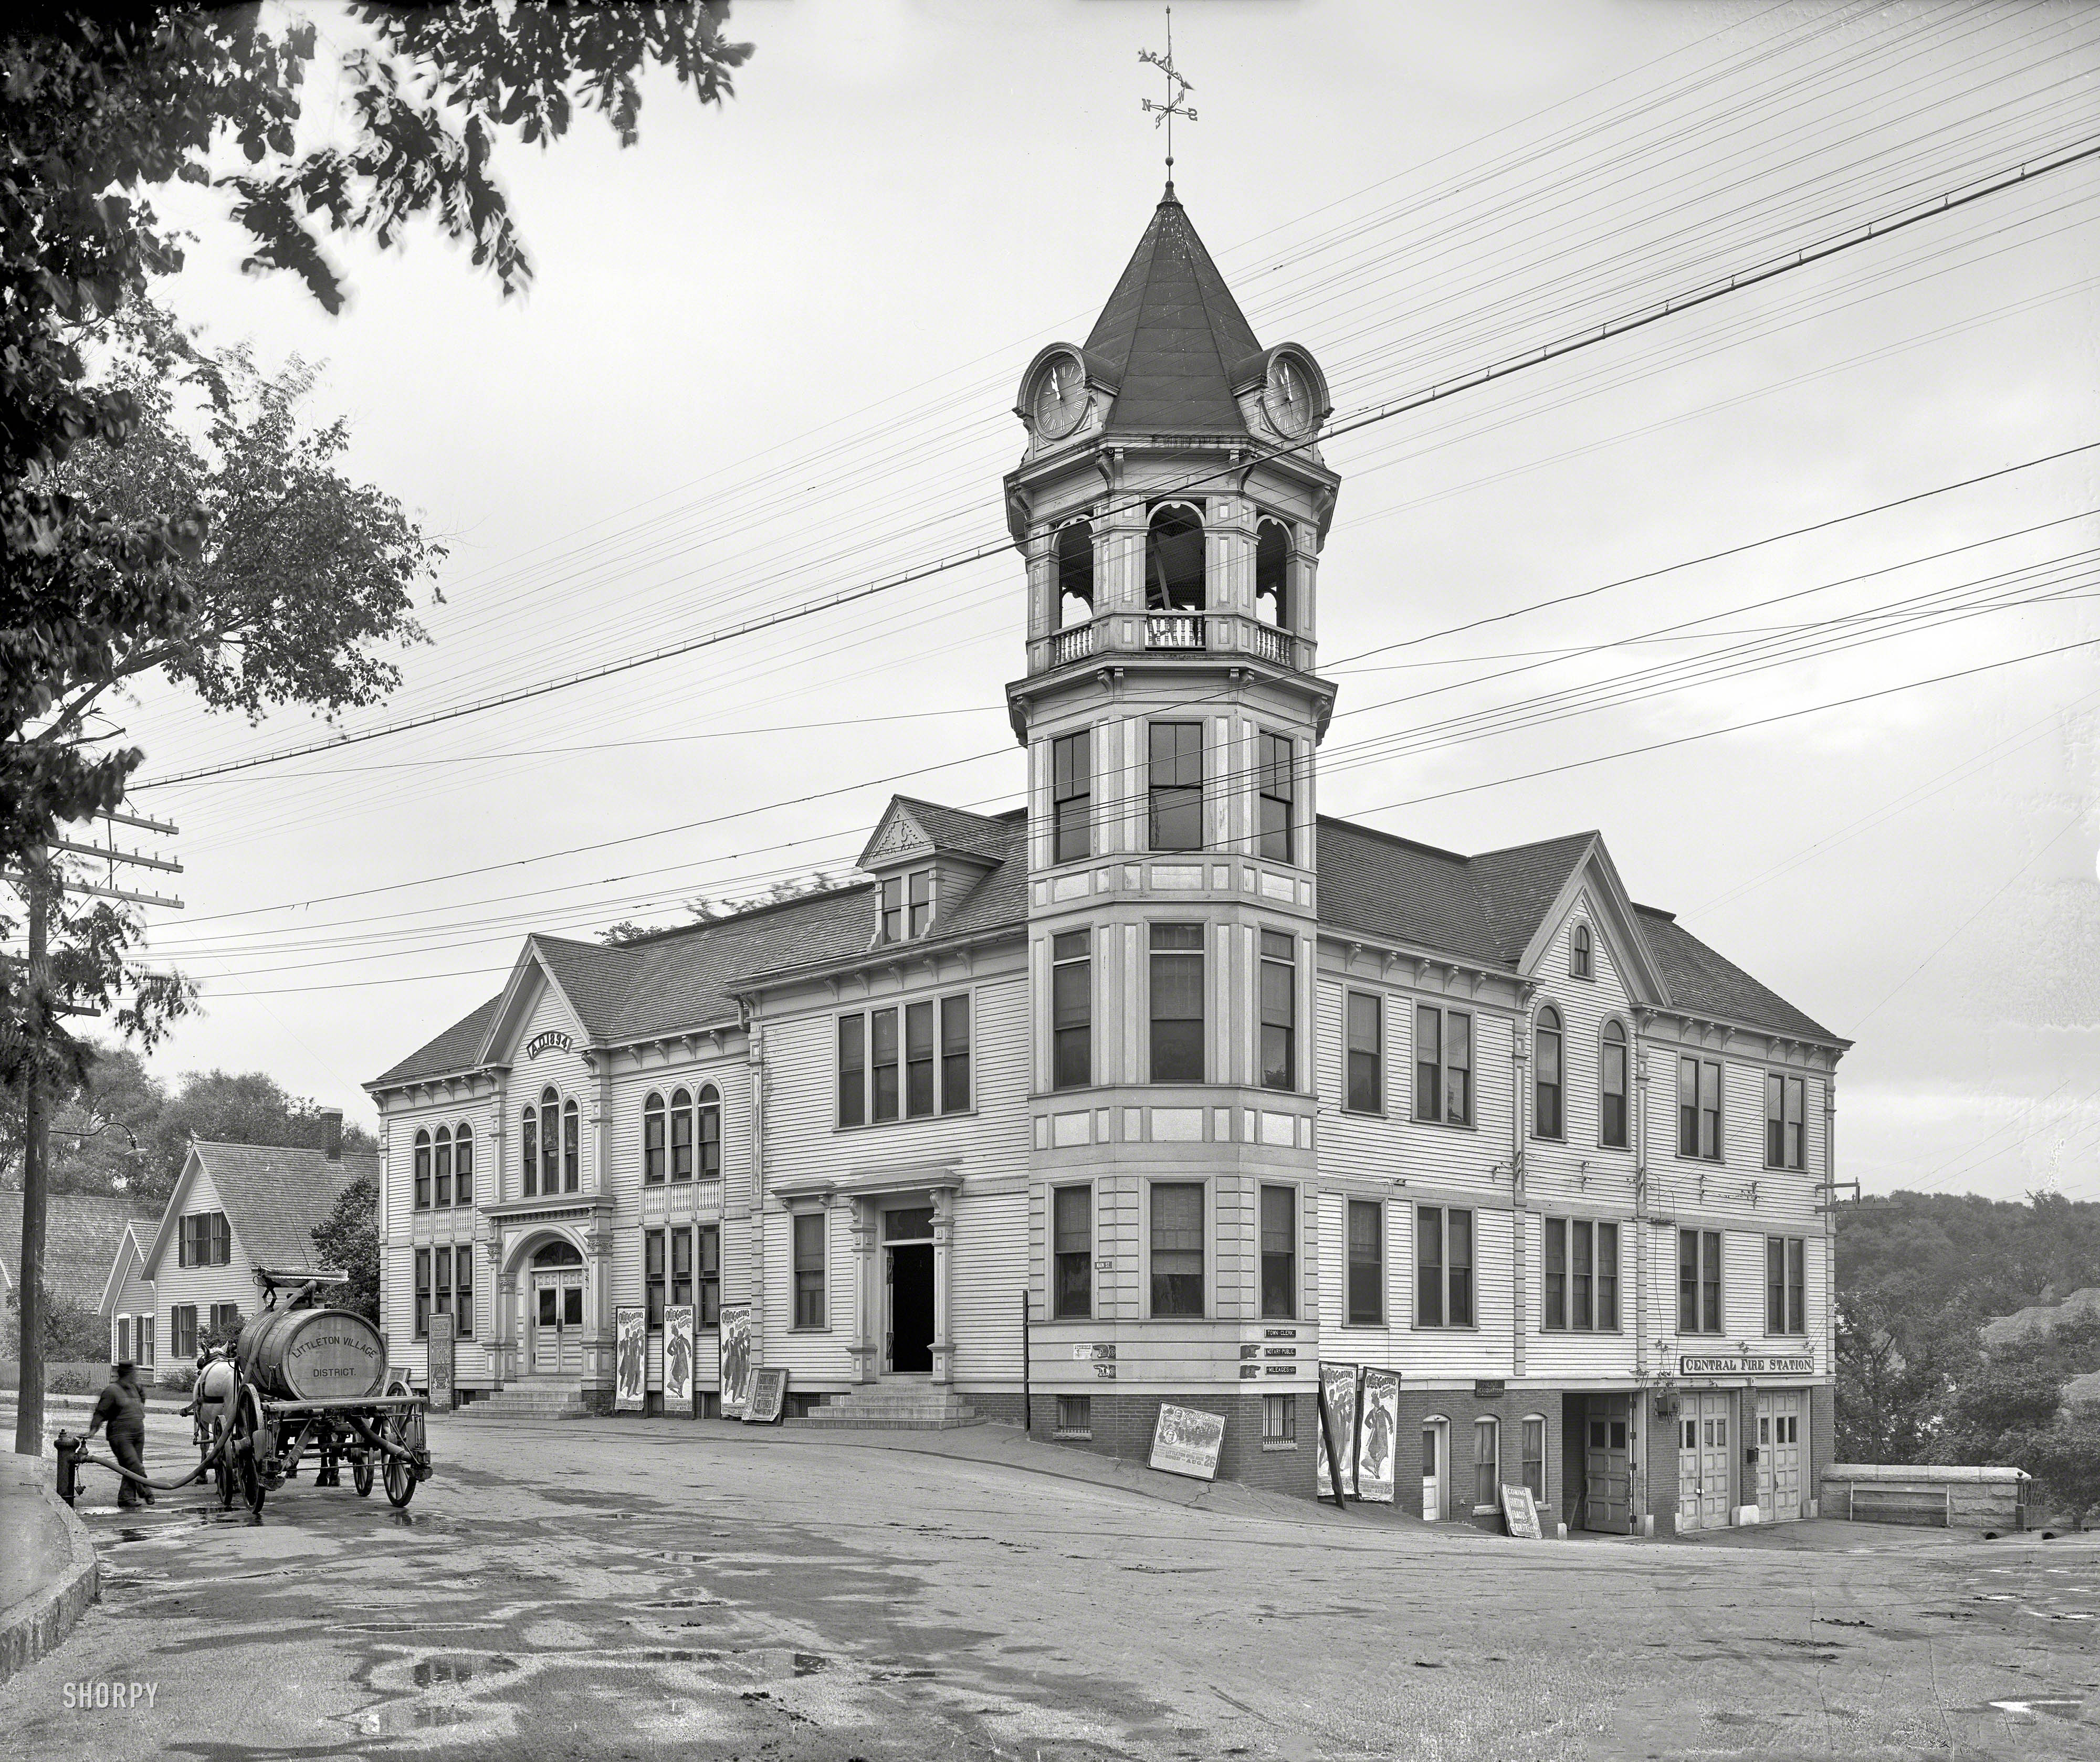 Circa 1907. "Town Building, fire station and opera house -- Littleton, N.H." Coming Aug. 26: Gorton's Famous Minstrels. 8x10 glass negative. View full size.